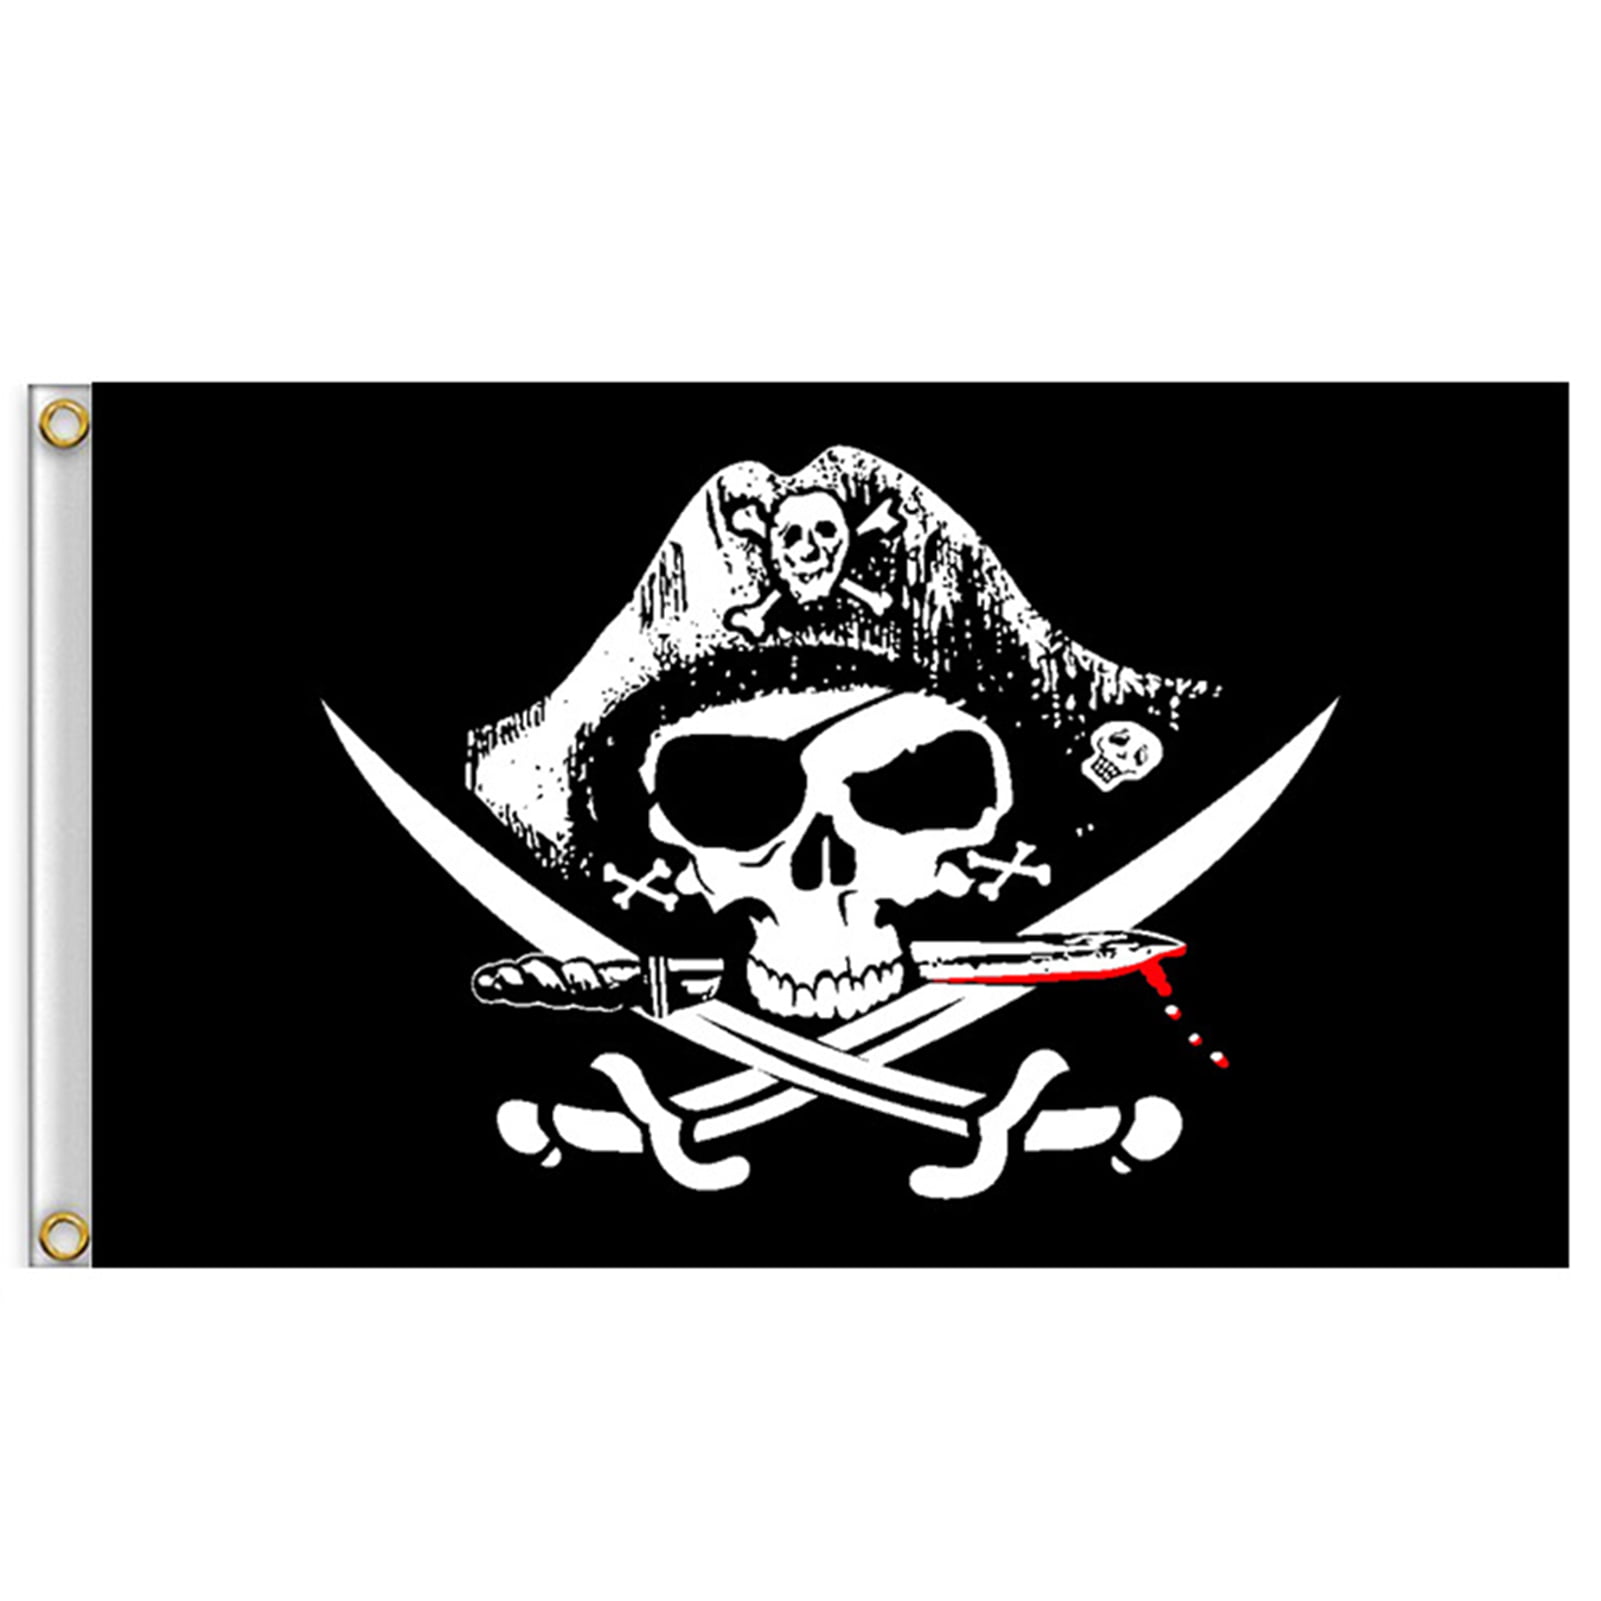 Brethren of the Coast Pirate Flag Ship Banner Jolly Roger Pennant New 2x3 Foot 